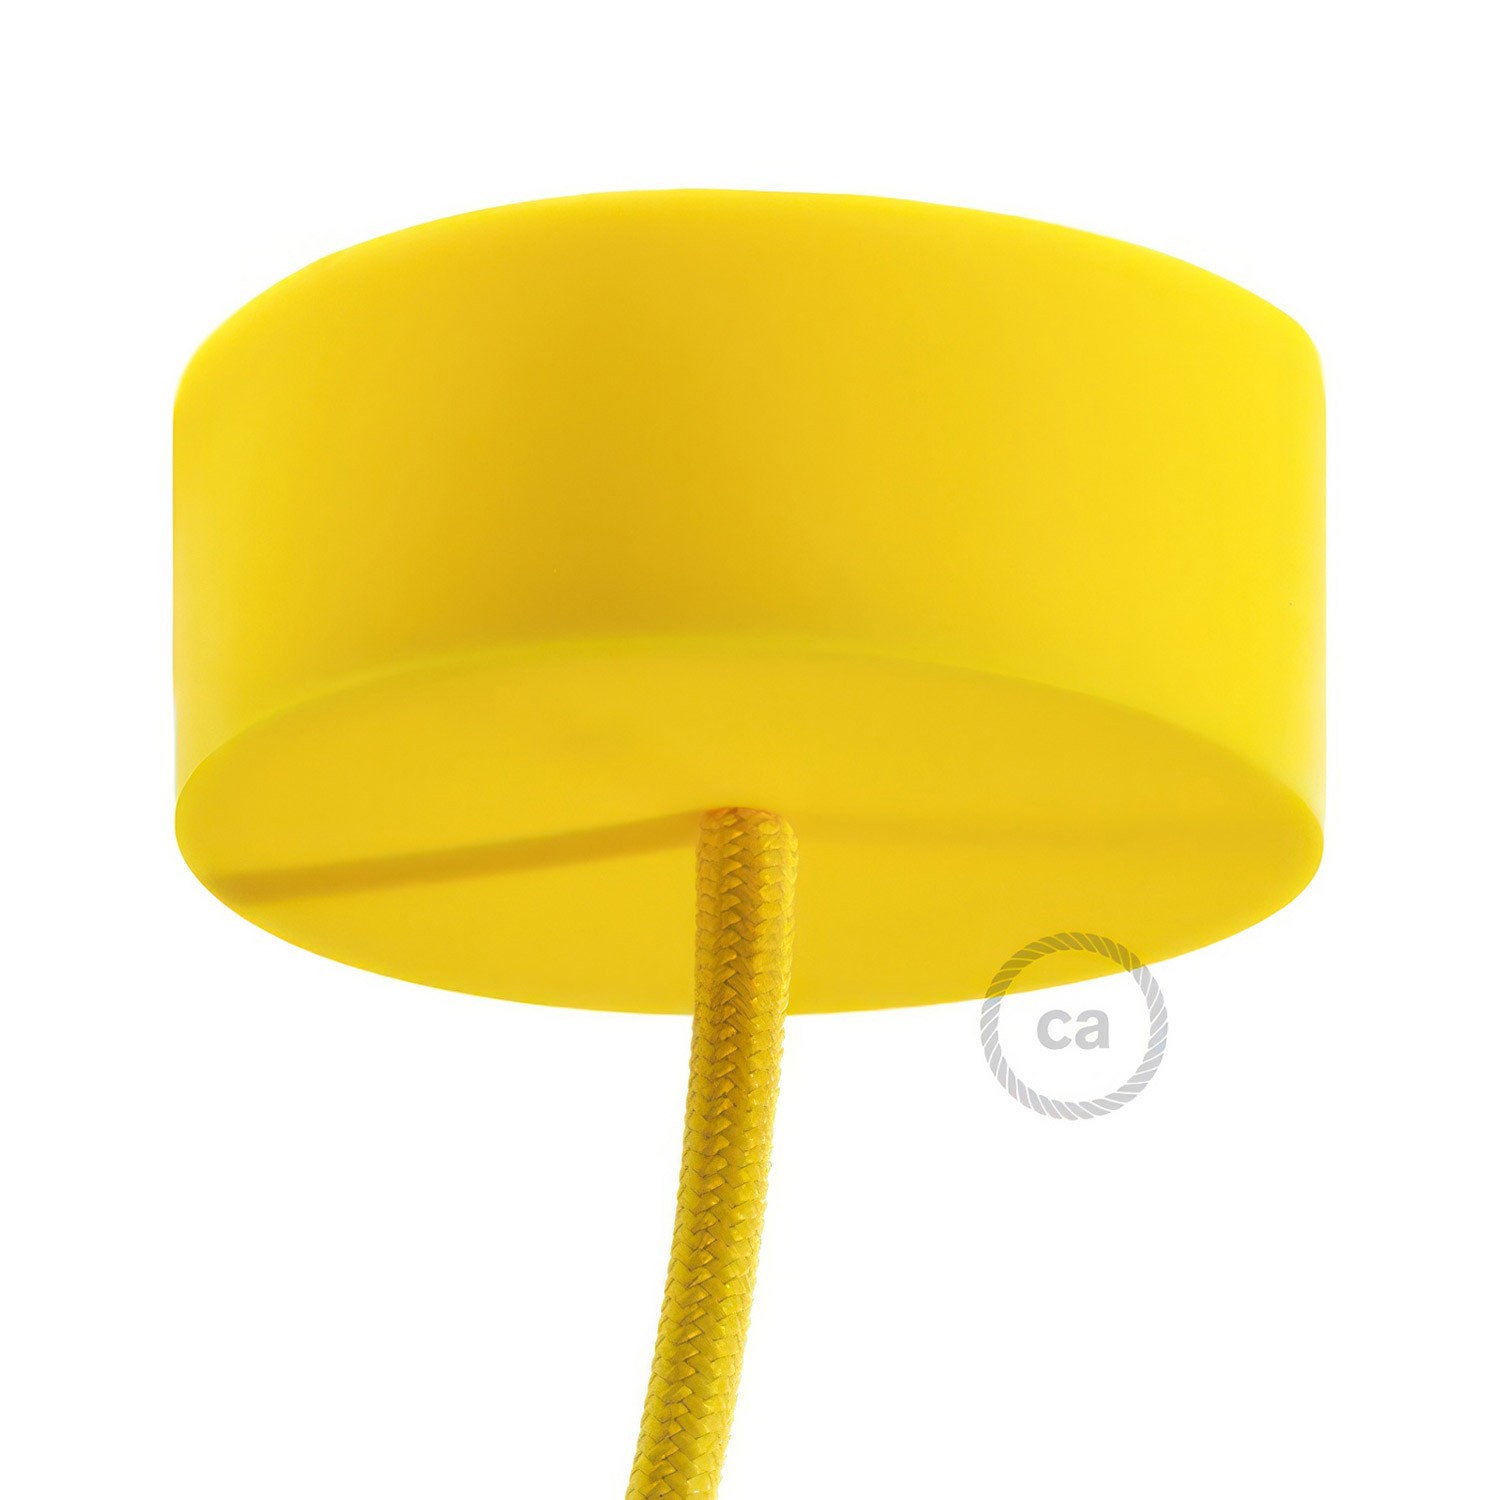 Silicone ceiling rose kit